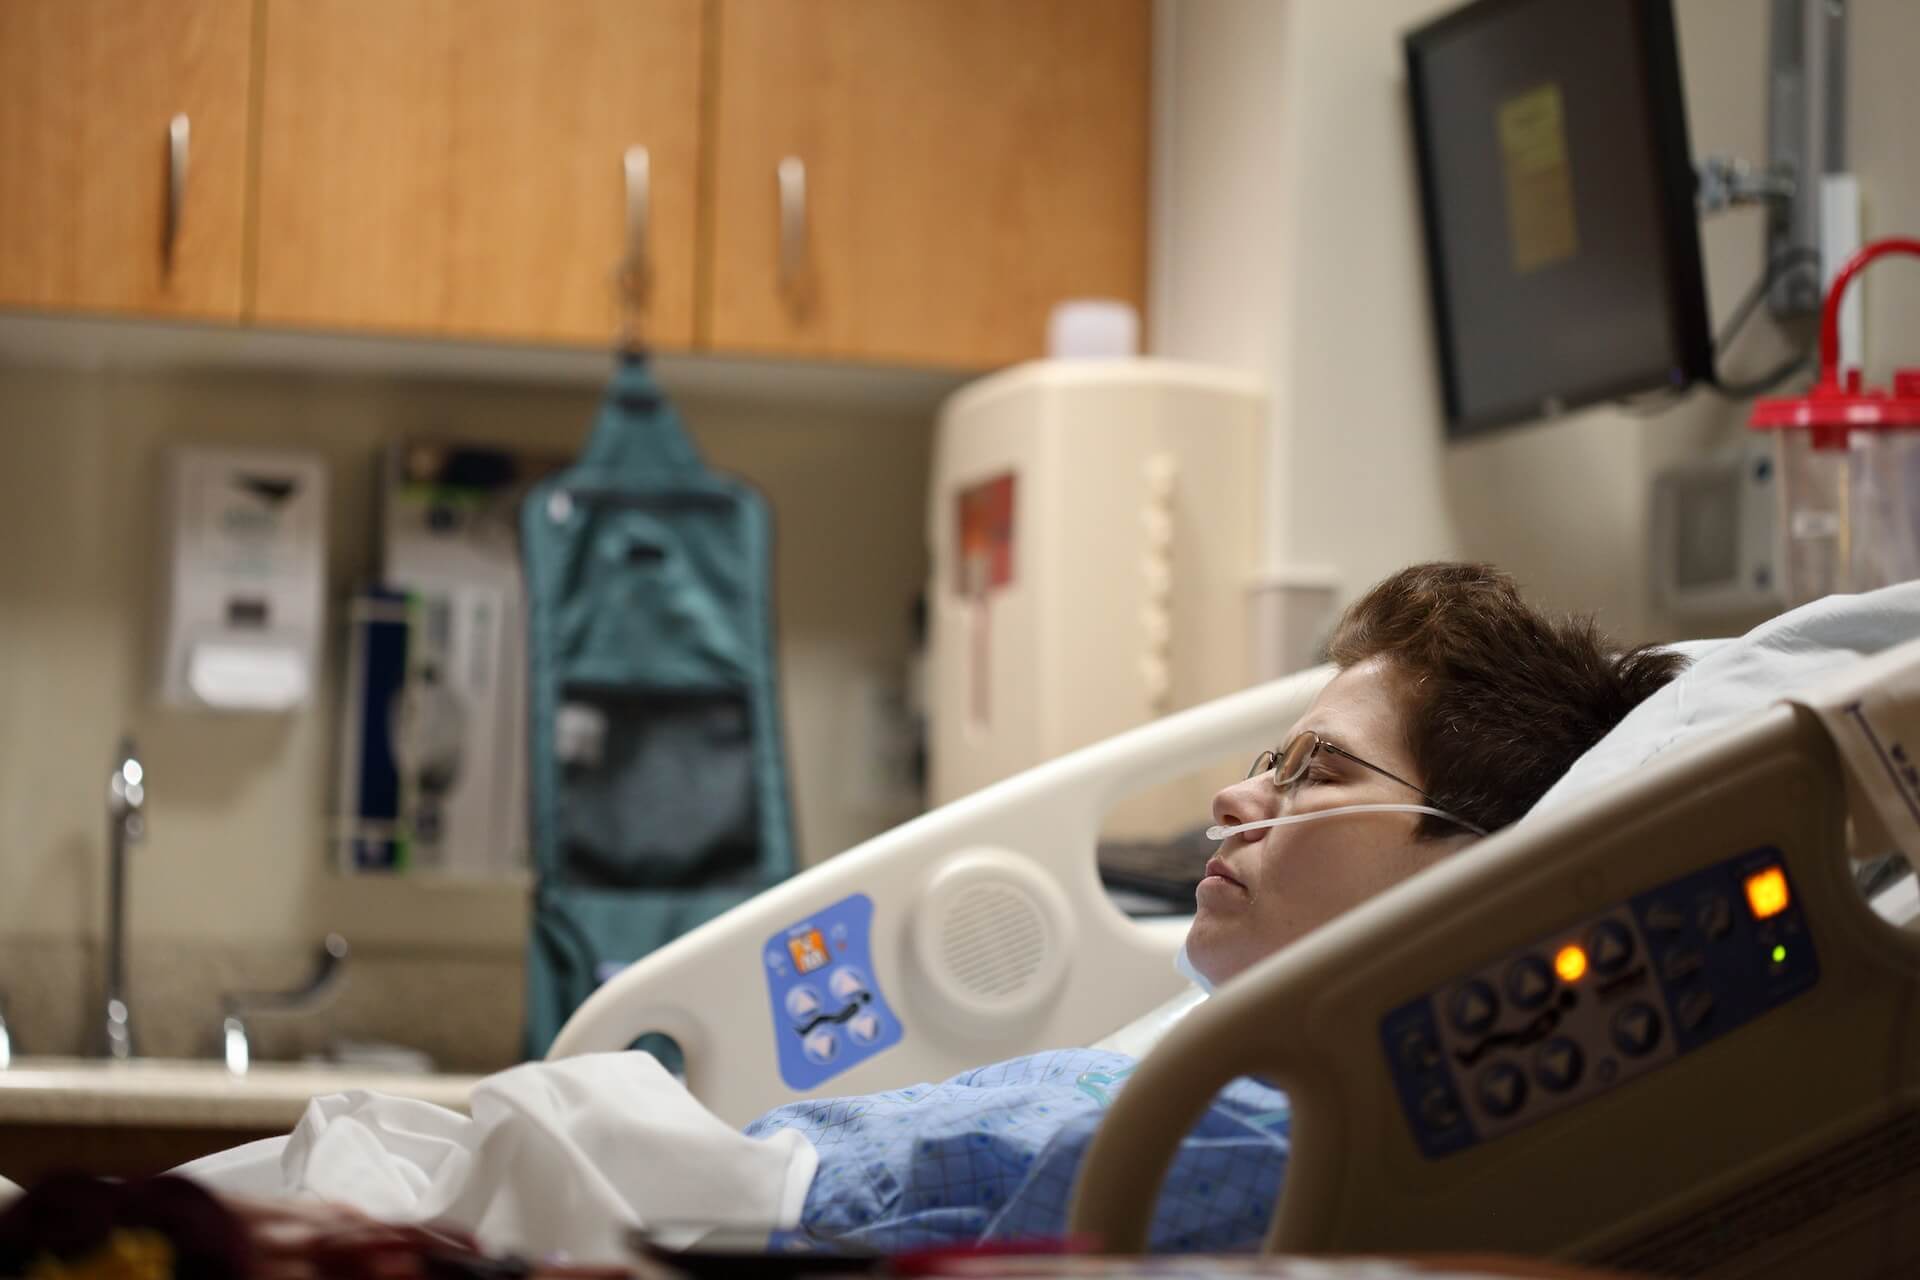 A patient waiting in a hospital bed